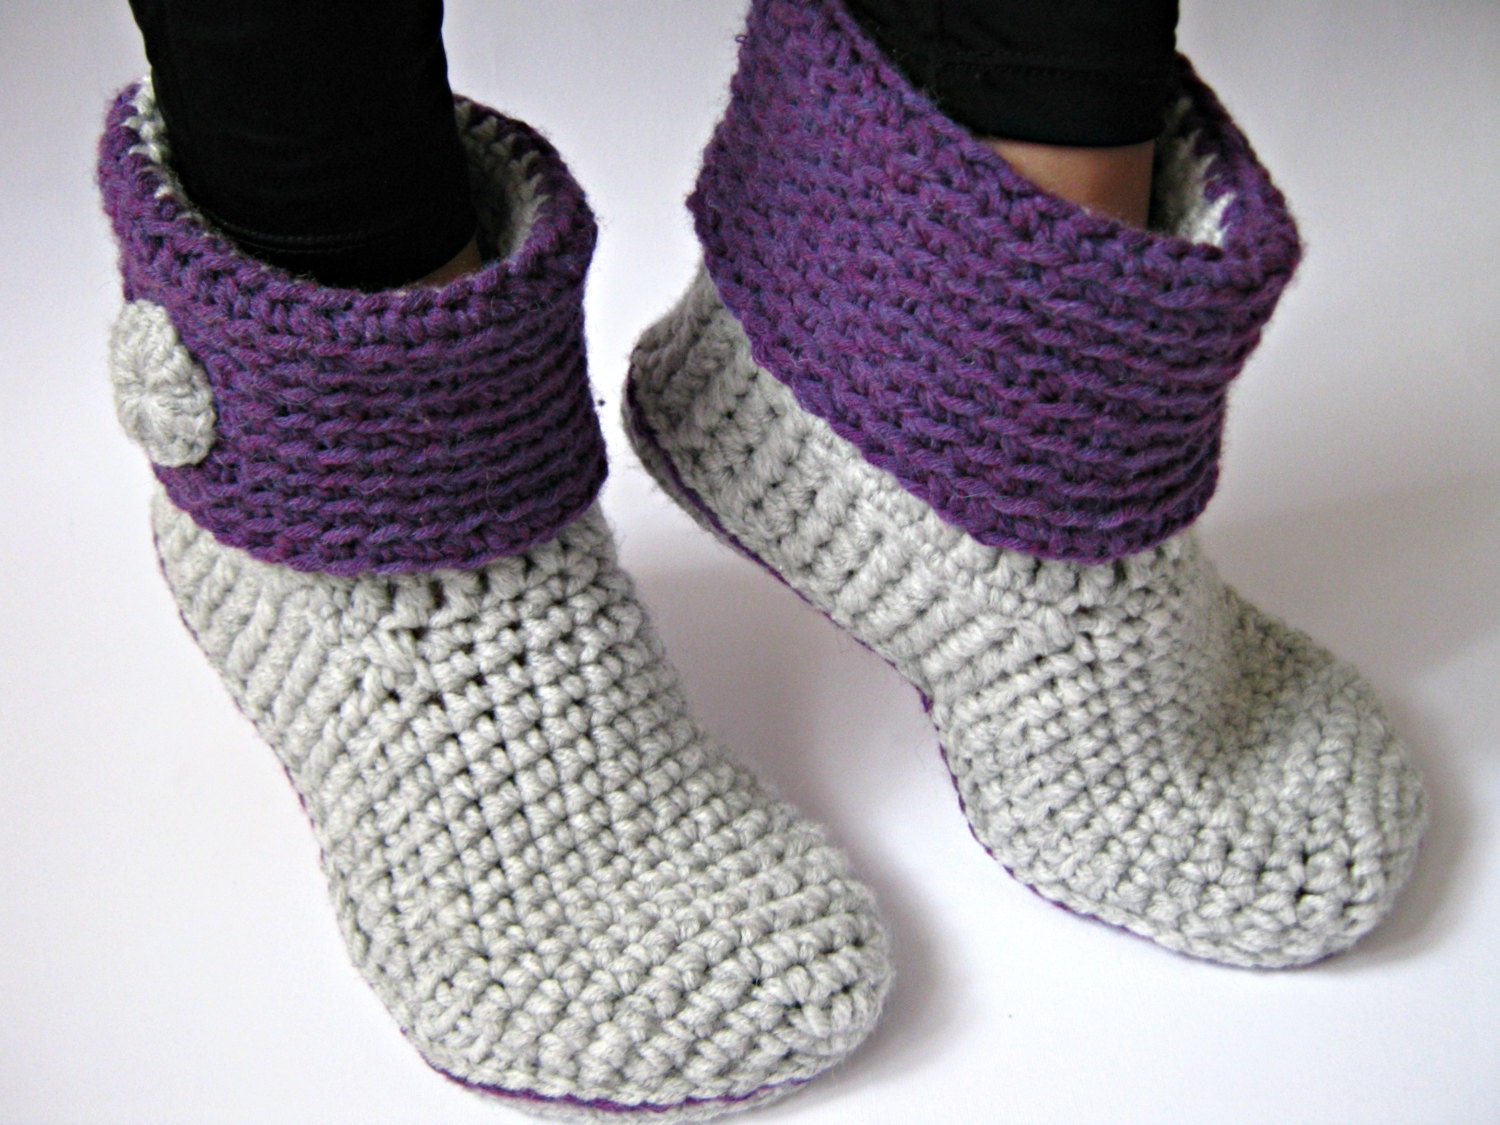 Crochet Women's Ankle Slipper Boots with Eco Leather